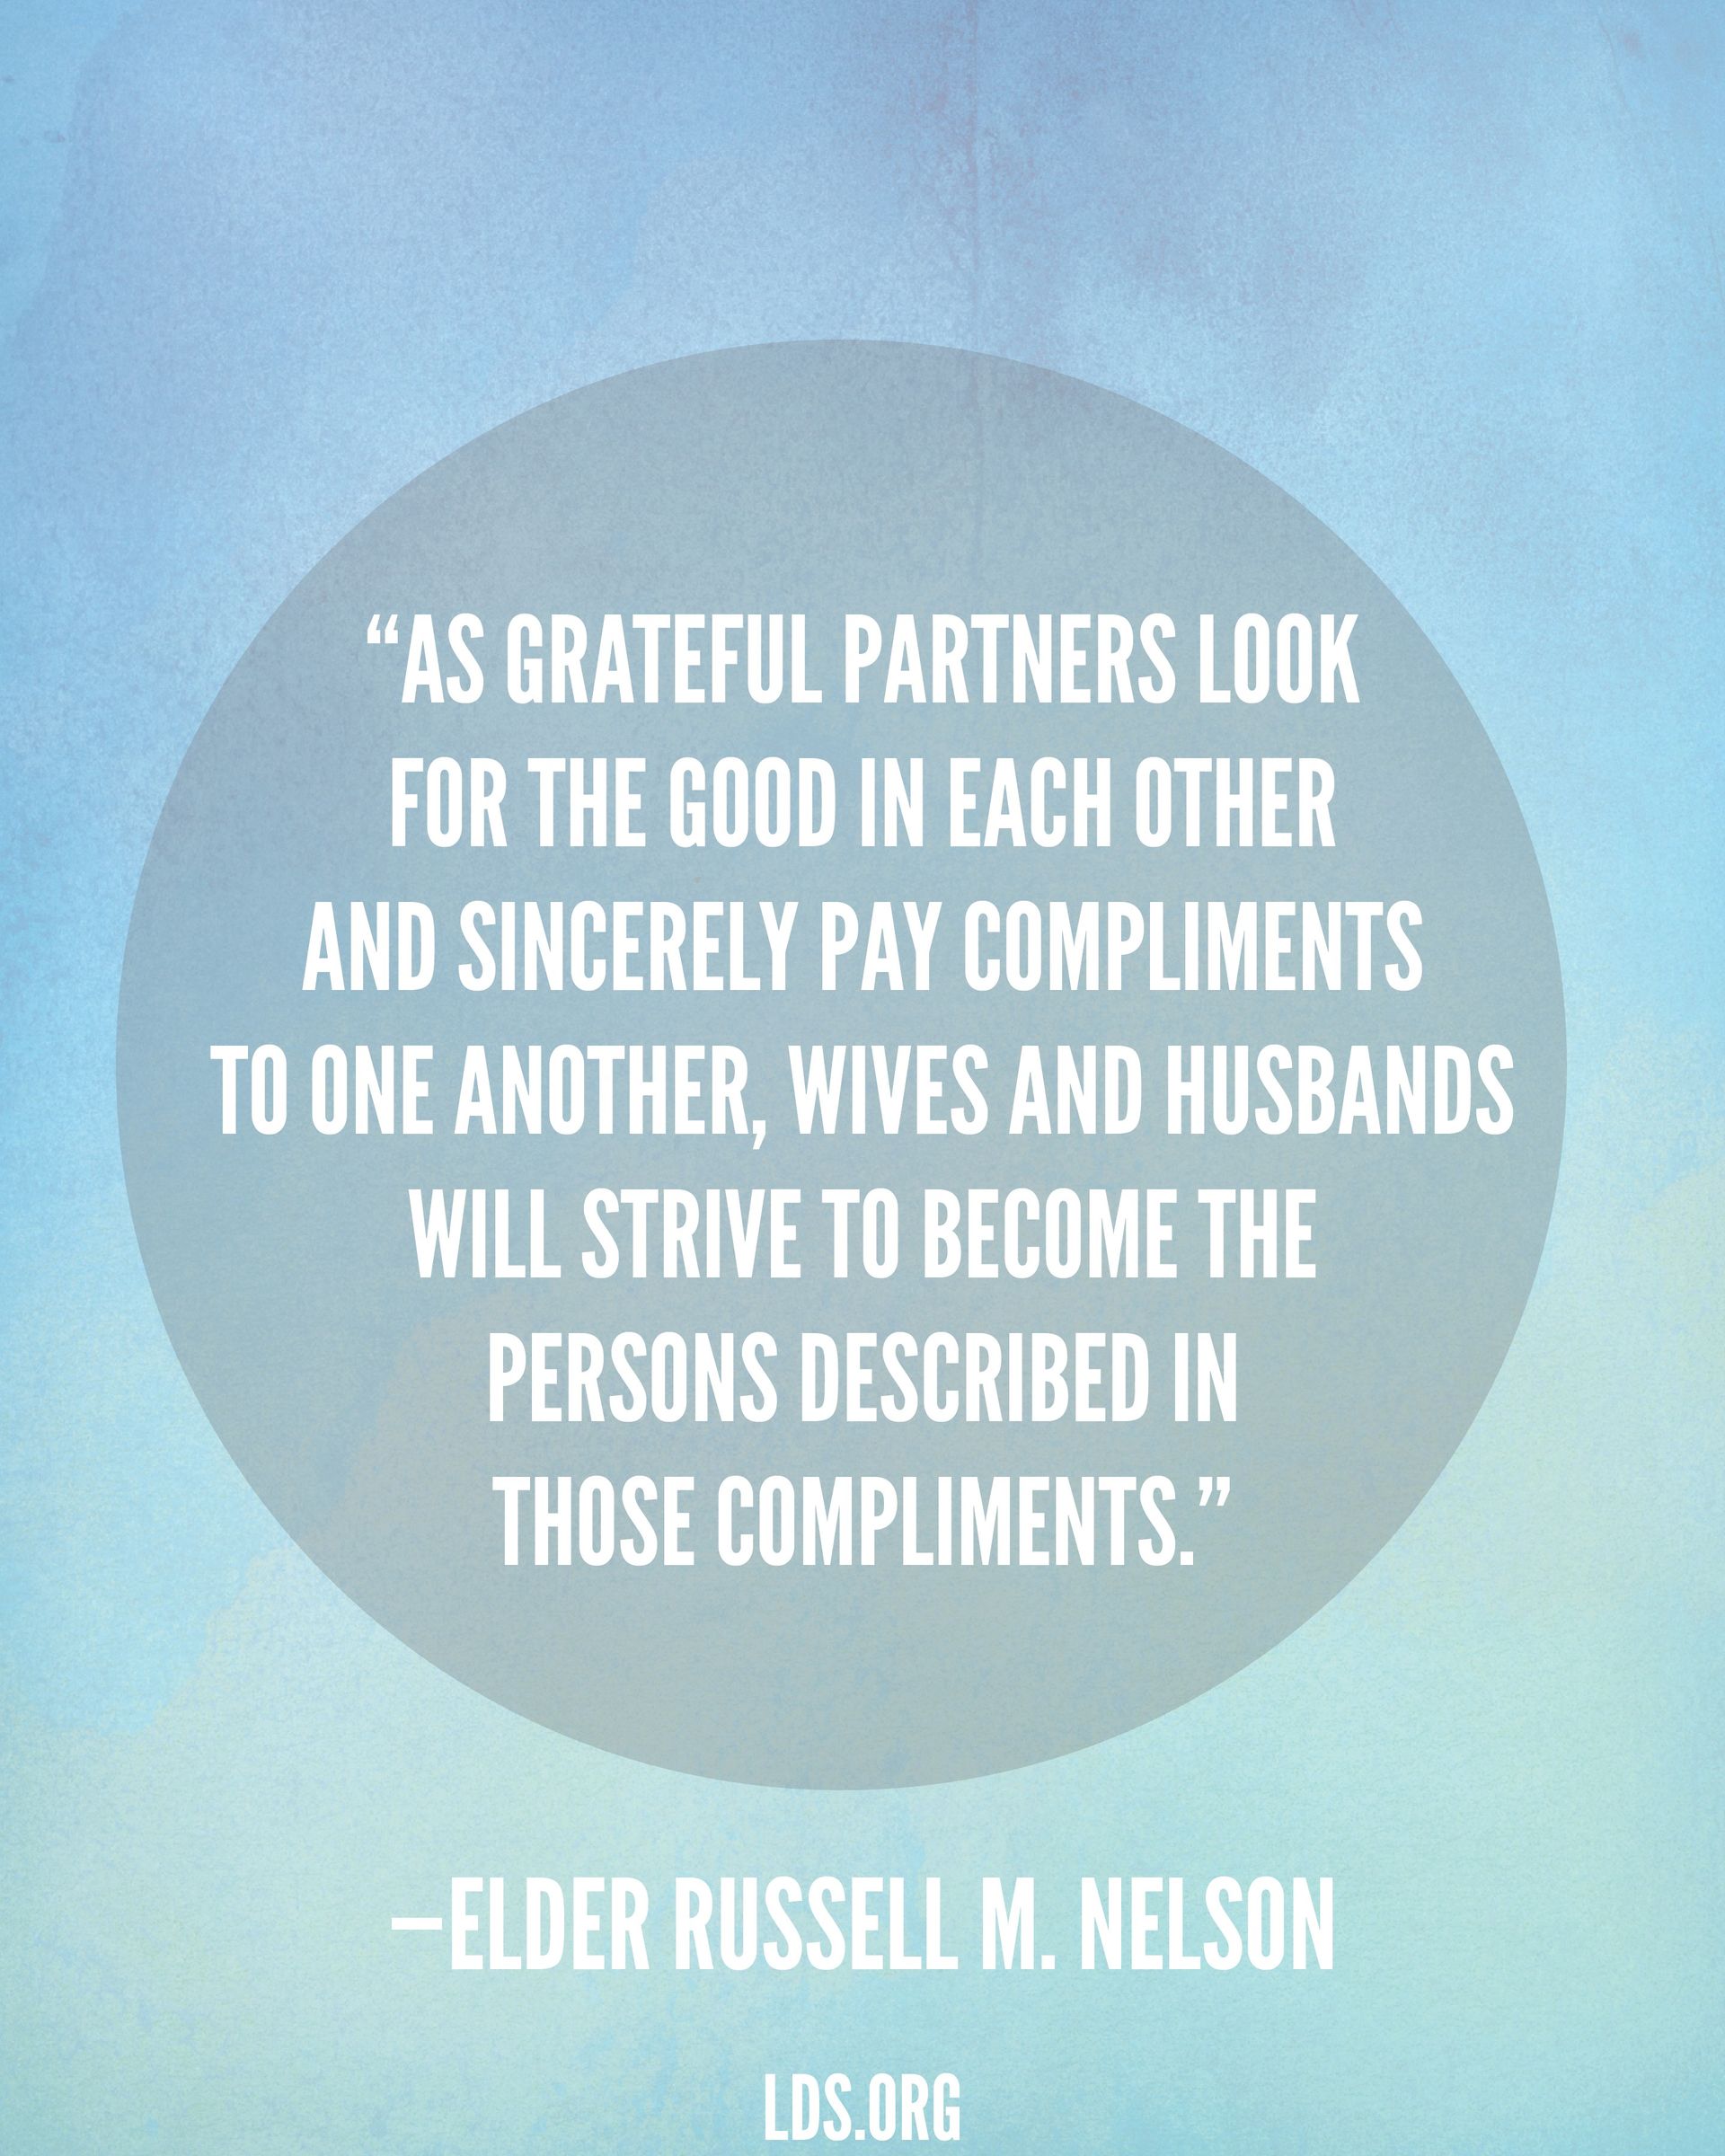 “As grateful partners look for the good in each other and sincerely pay compliments to one another, wives and husbands will strive to become the persons described in those compliments.”—President Russell M. Nelson, “Nurturing Marriage”